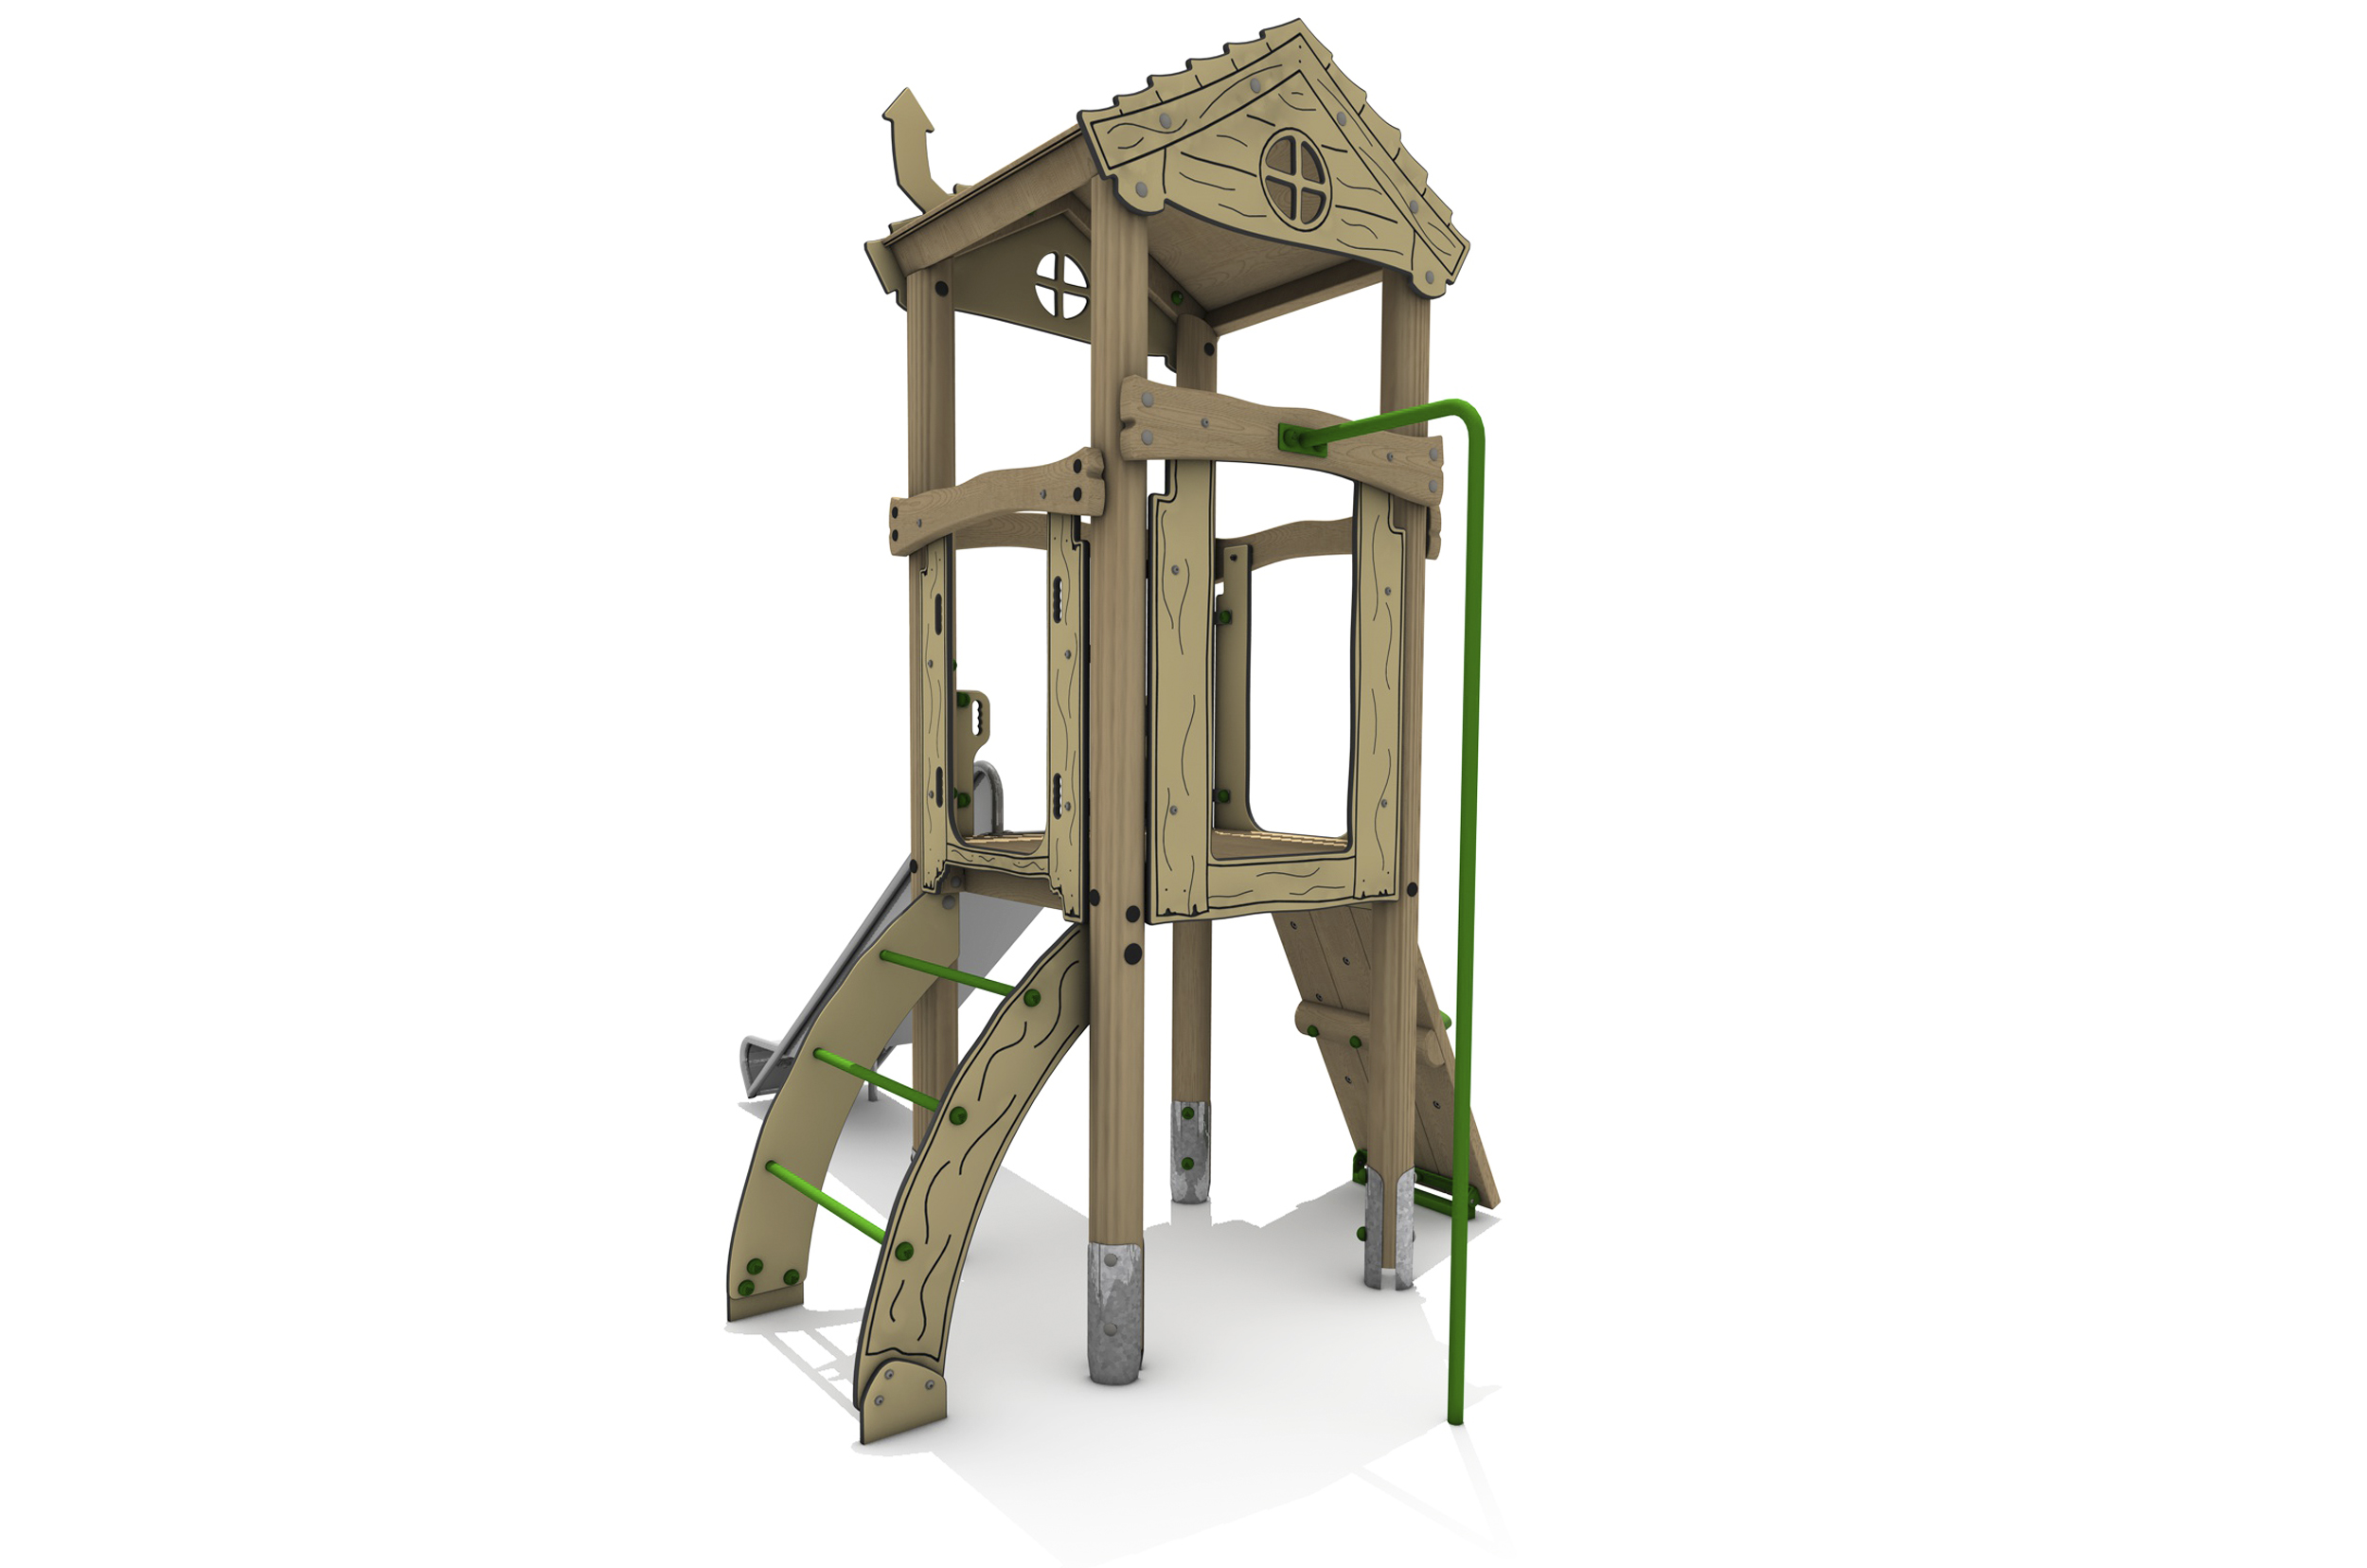 Timber Tower Single Deck 03, A timber tower climber with a arched green rung ladder on the left, a green fire pole on the middle complete with a roof with chimney